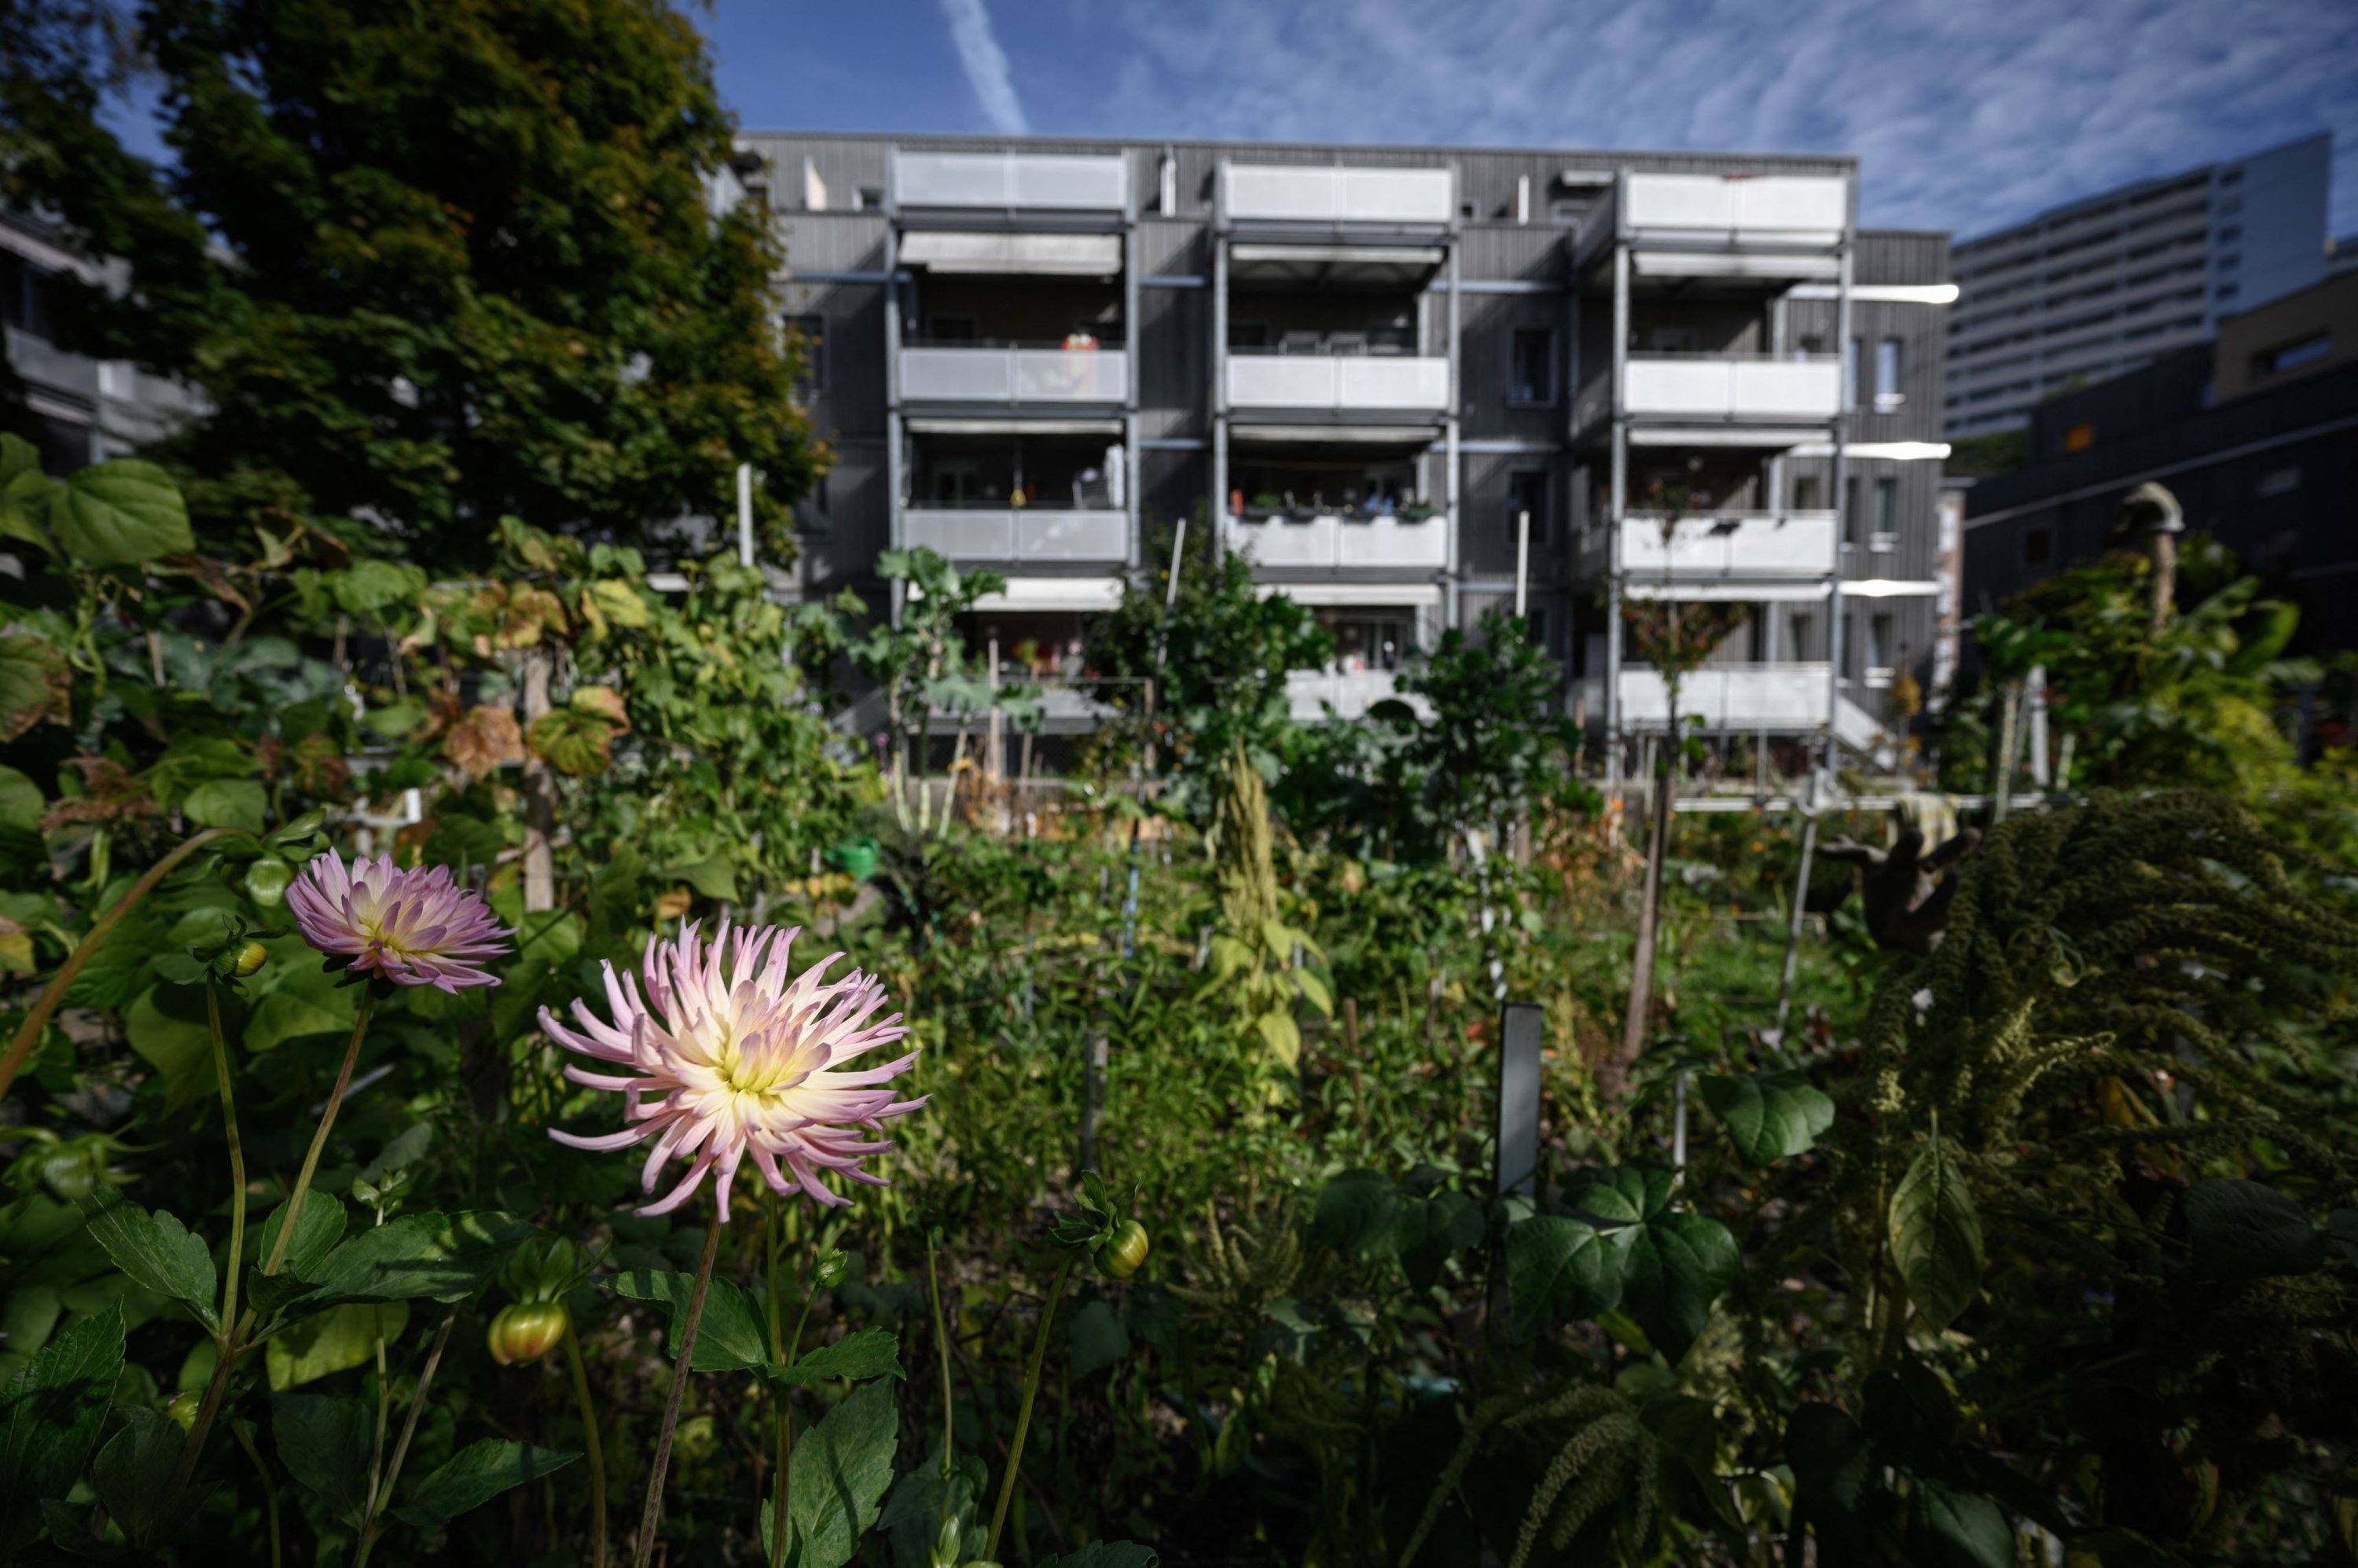 Flowers in the dioxin-polluted allotment garden of La Borde in the center of Lausanne, Switzerland, Oct. 15, 2021. (AFP Photo)